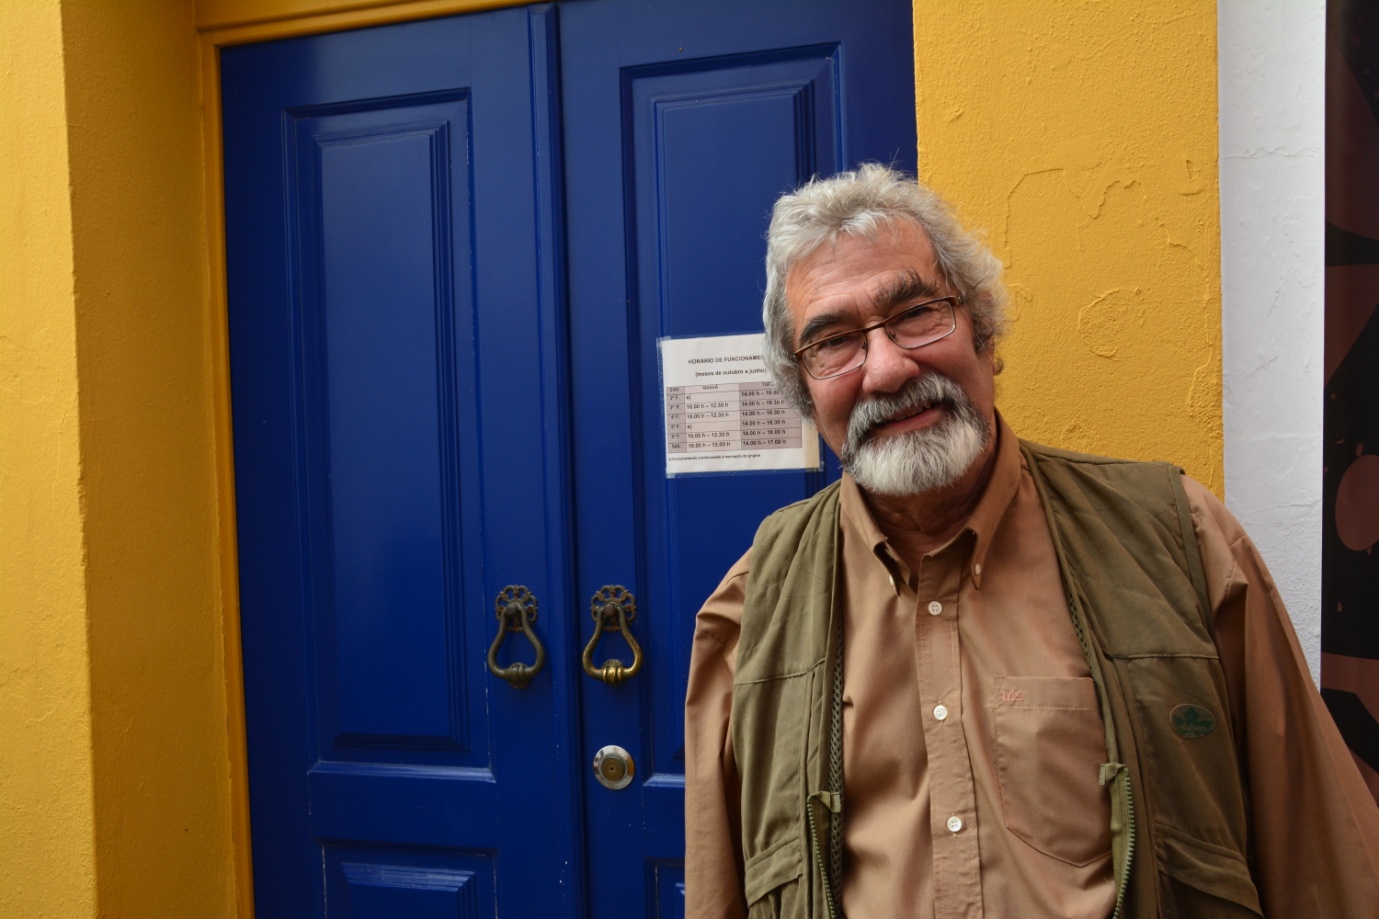 Portuguese archaeologist and founder of the Archaeological Field of Mertola, Claudio Torres (photo: Marta Vidal)